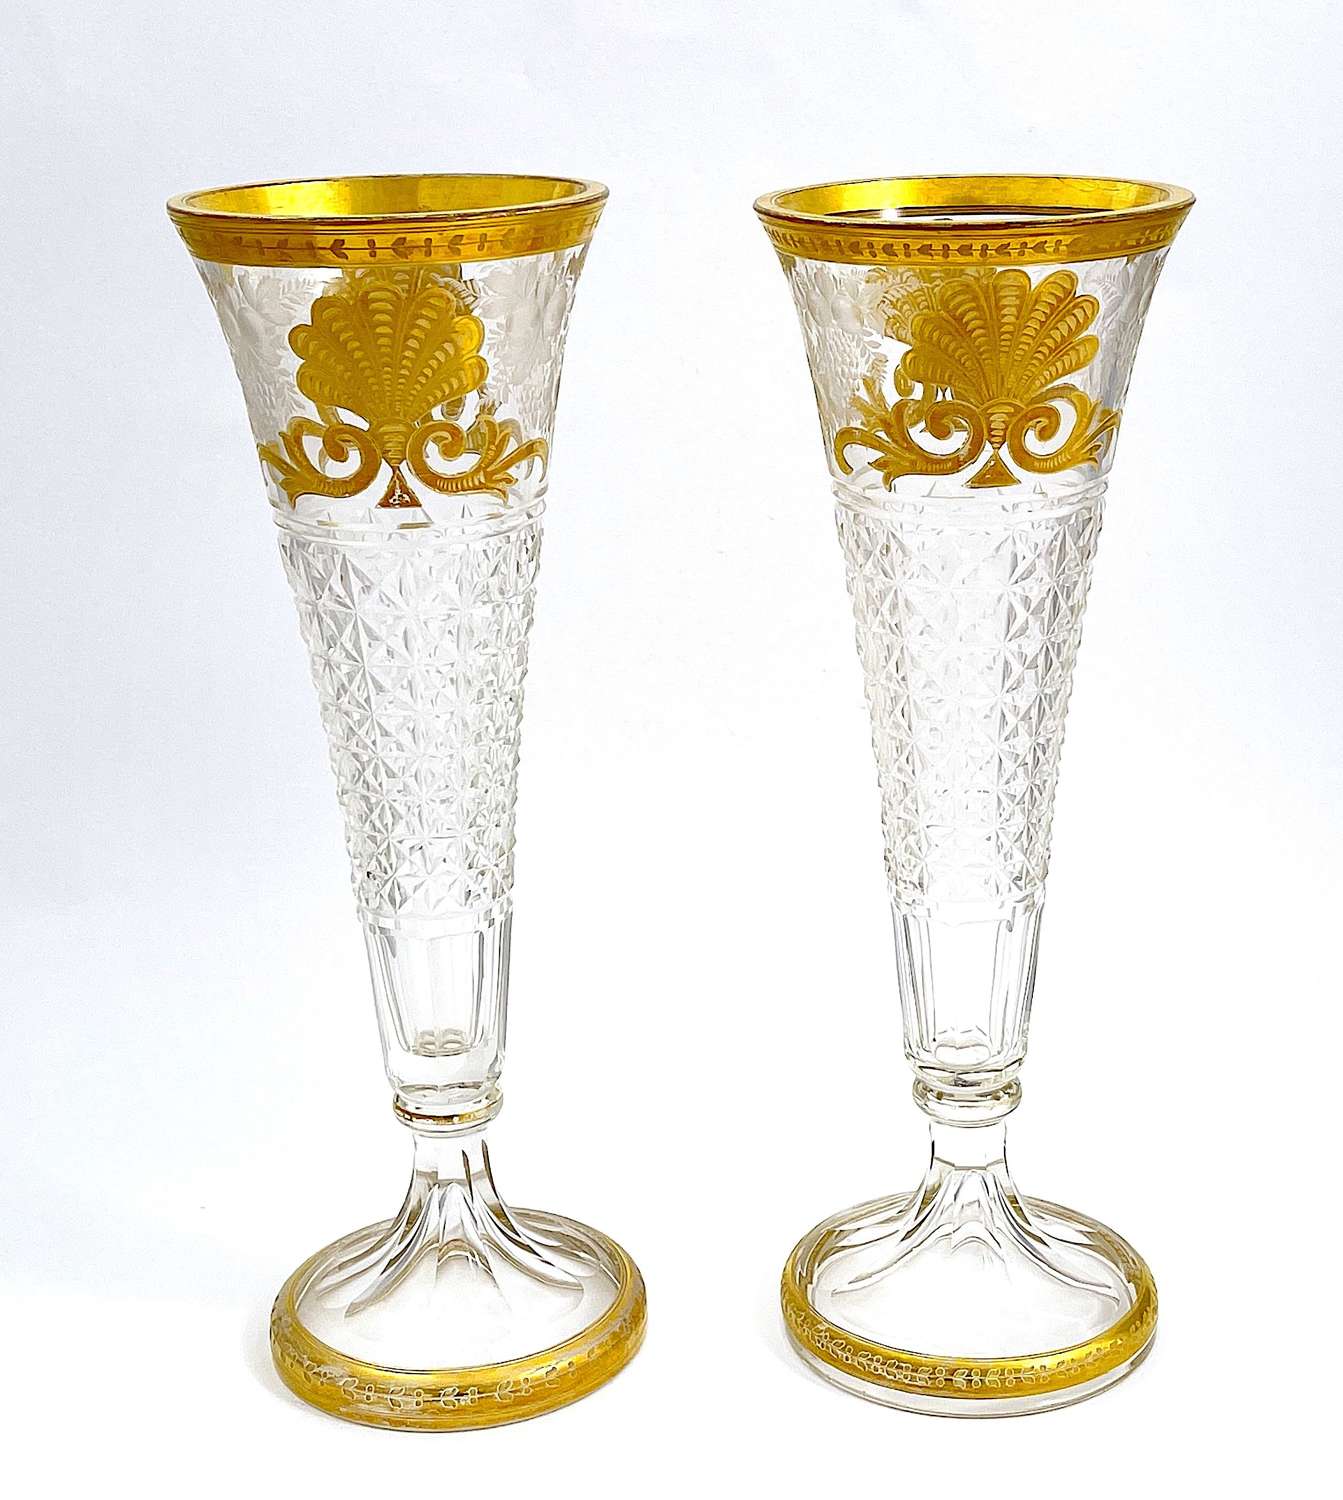 Antique Baccarat Crystal Vases with Beautiful Shell Design